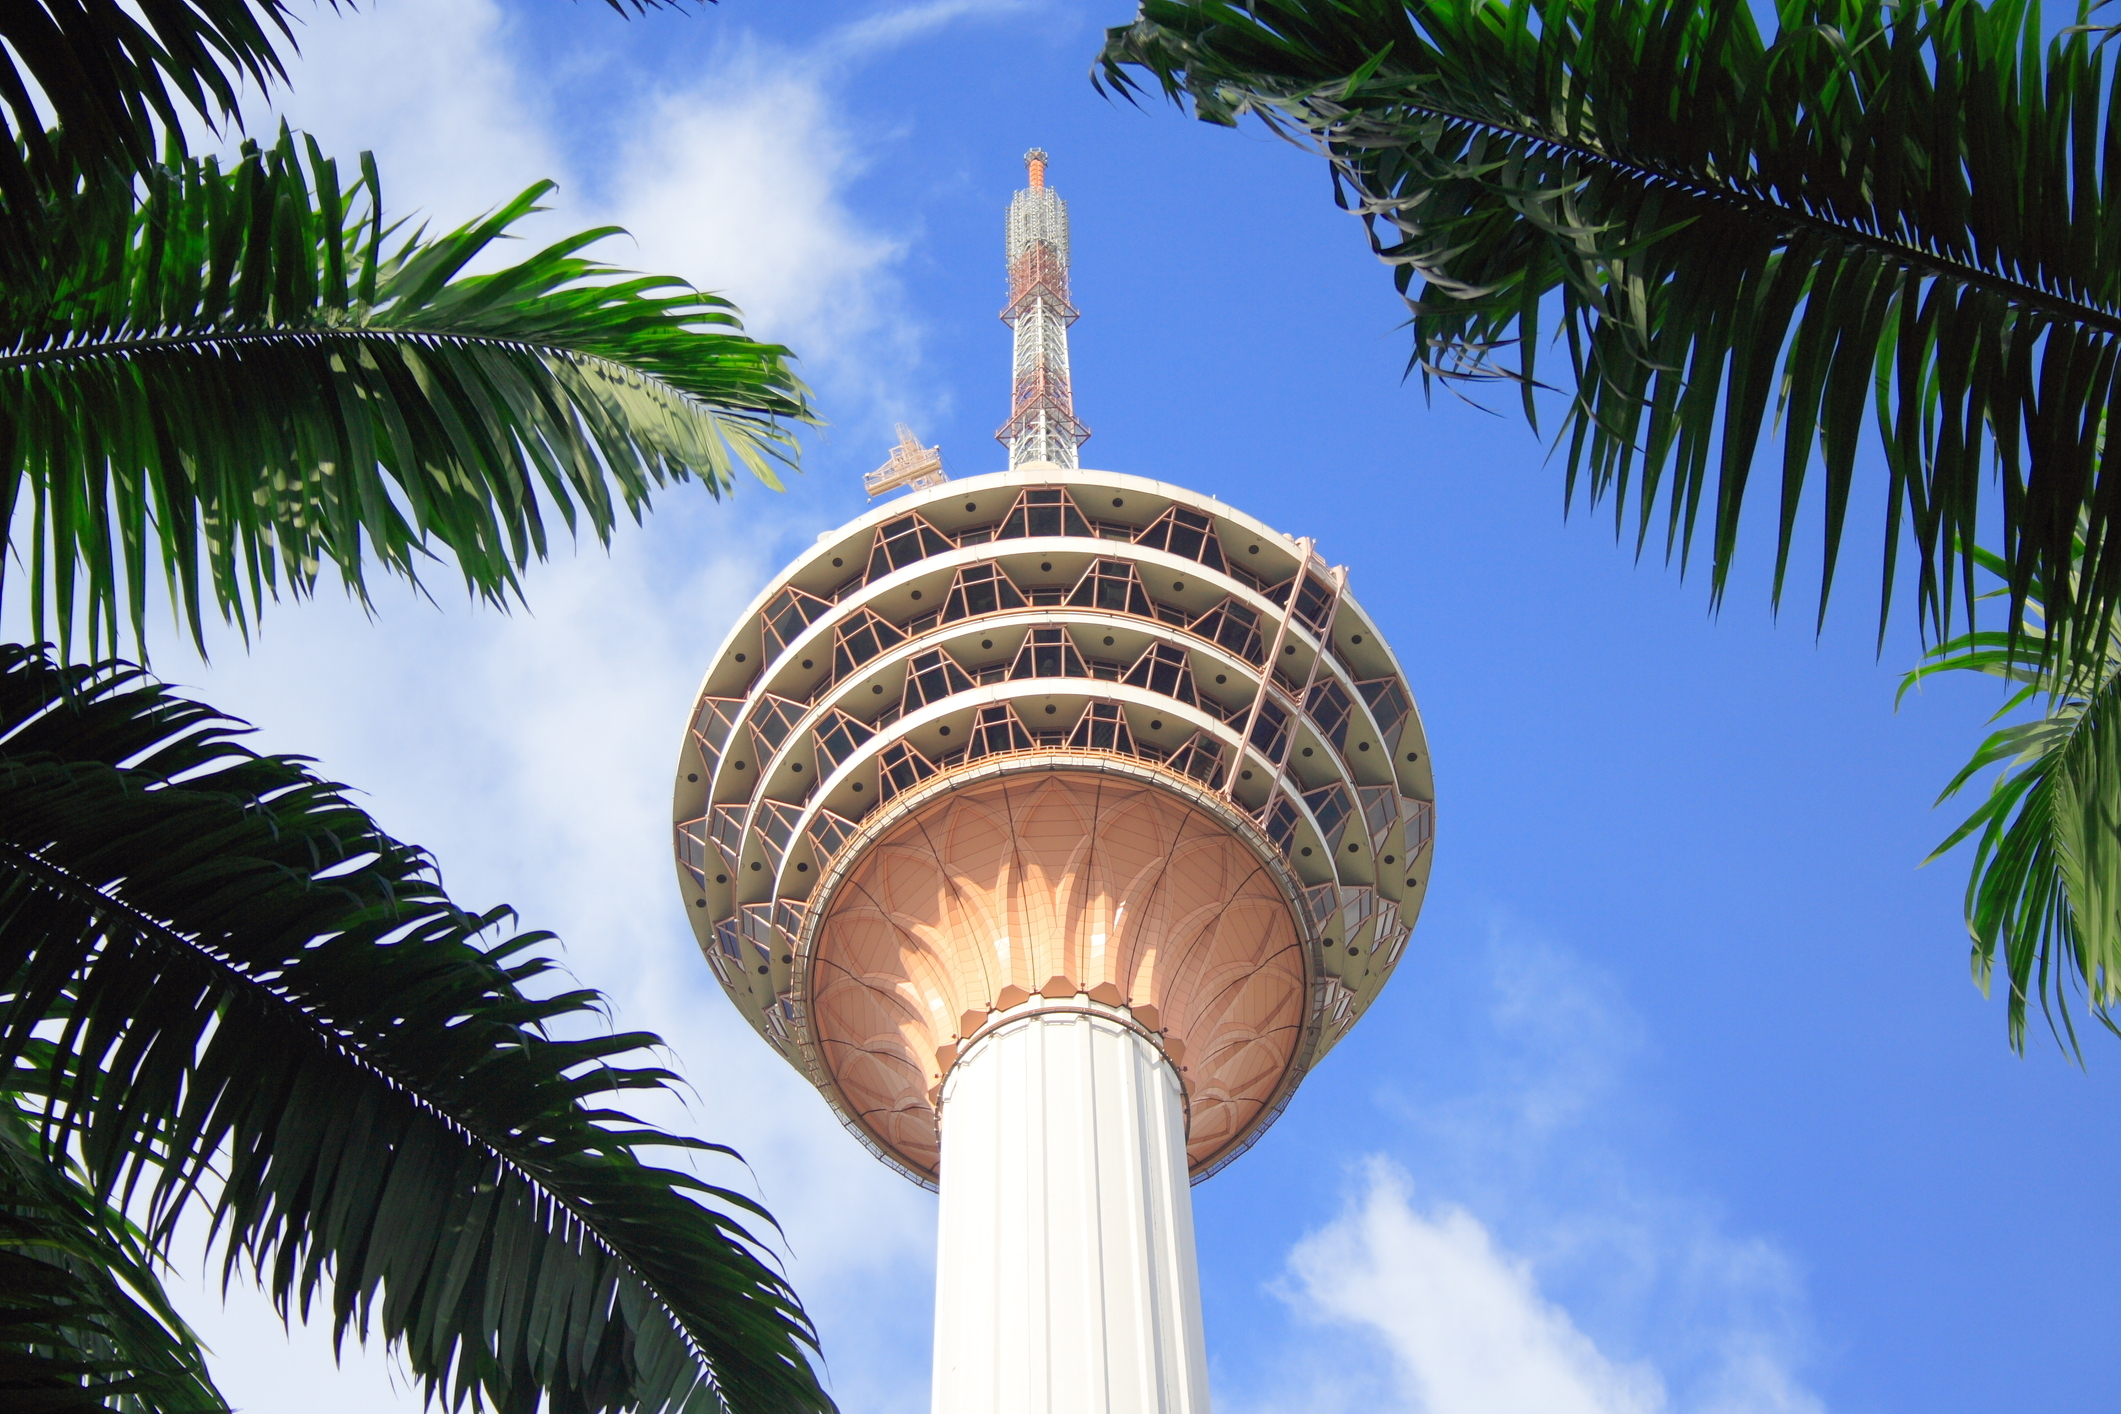 KL Tower | Things to do in KL City Centre, Kuala Lumpur